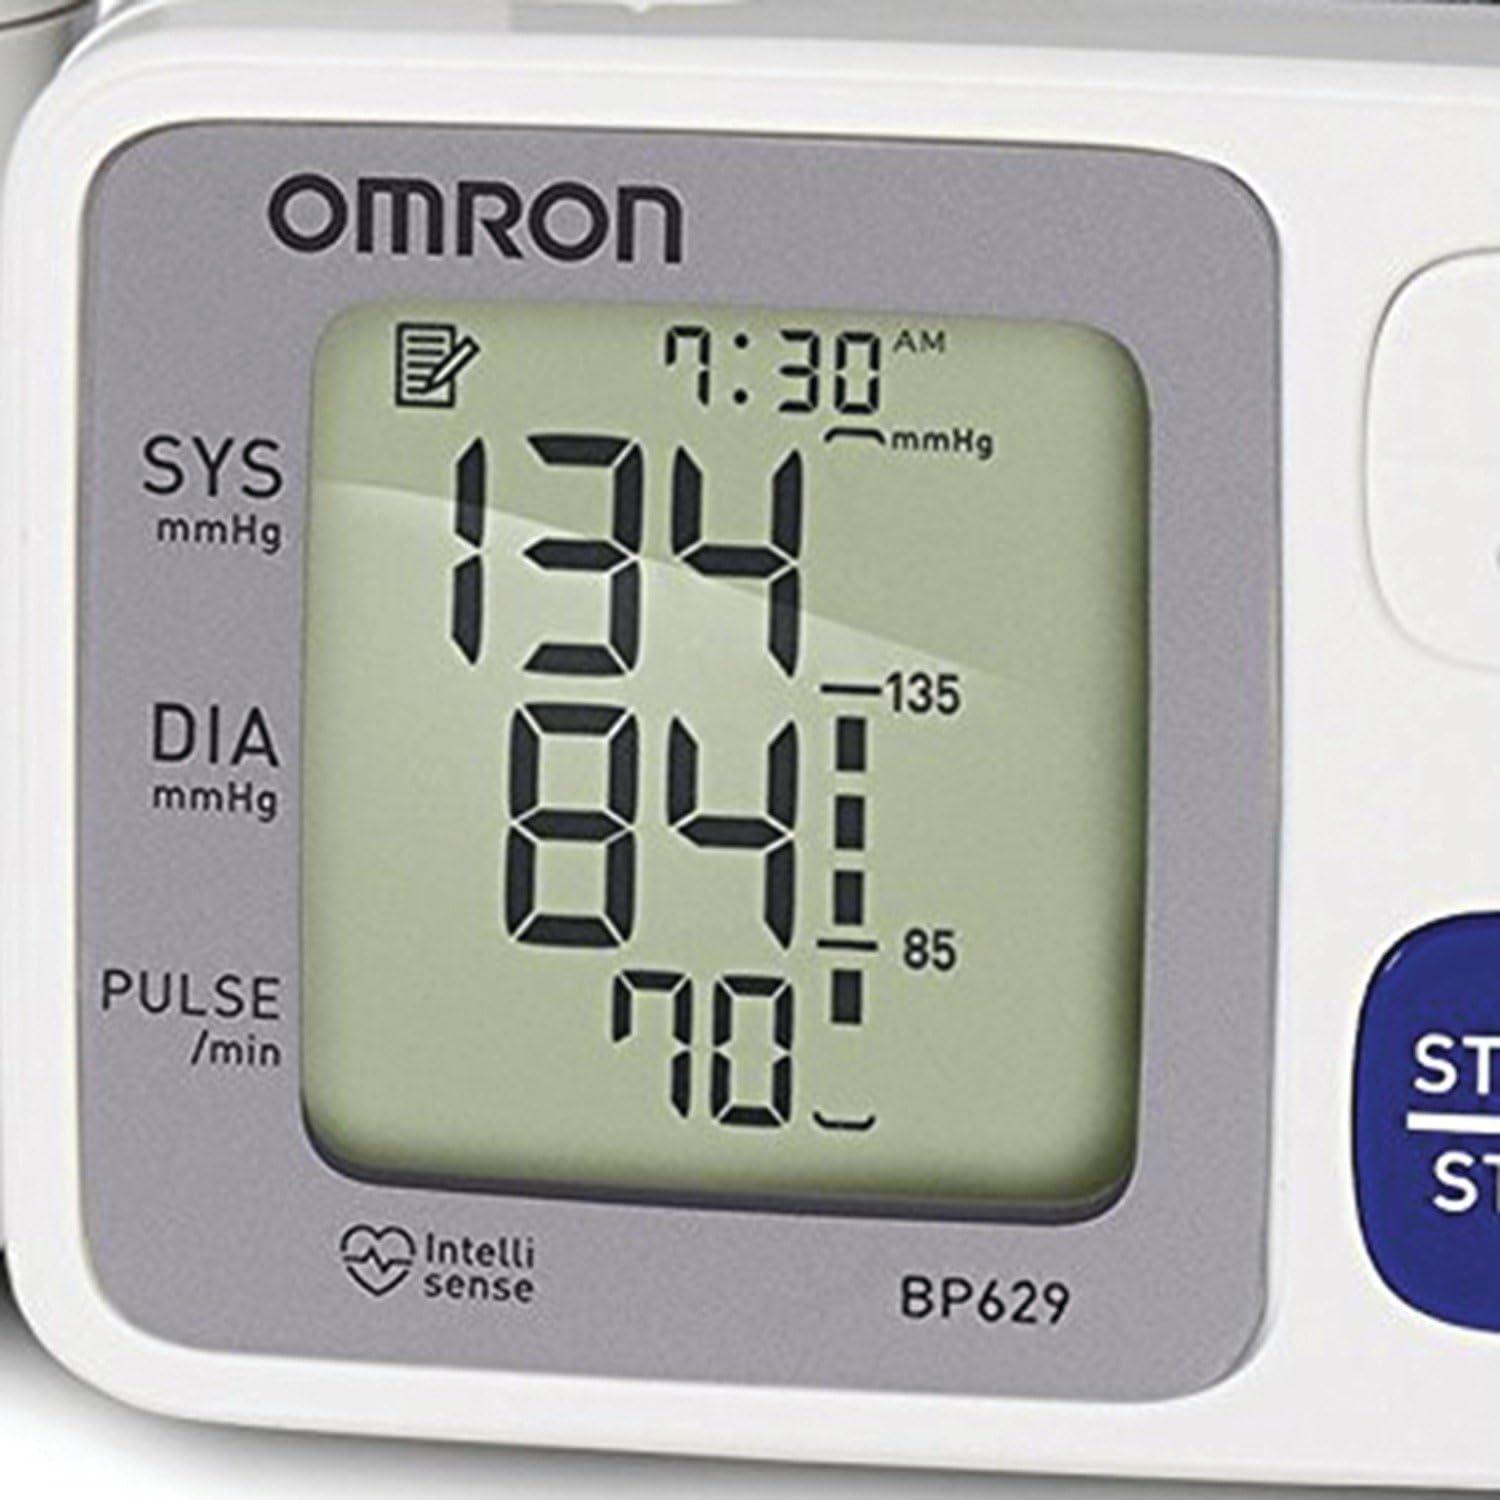  Omron 7 Series Wrist Blood Pressure Monitor; 100-Reading Memory  with Heart Zone Guidance and UltraSilent Inflation by Omron : Health &  Household